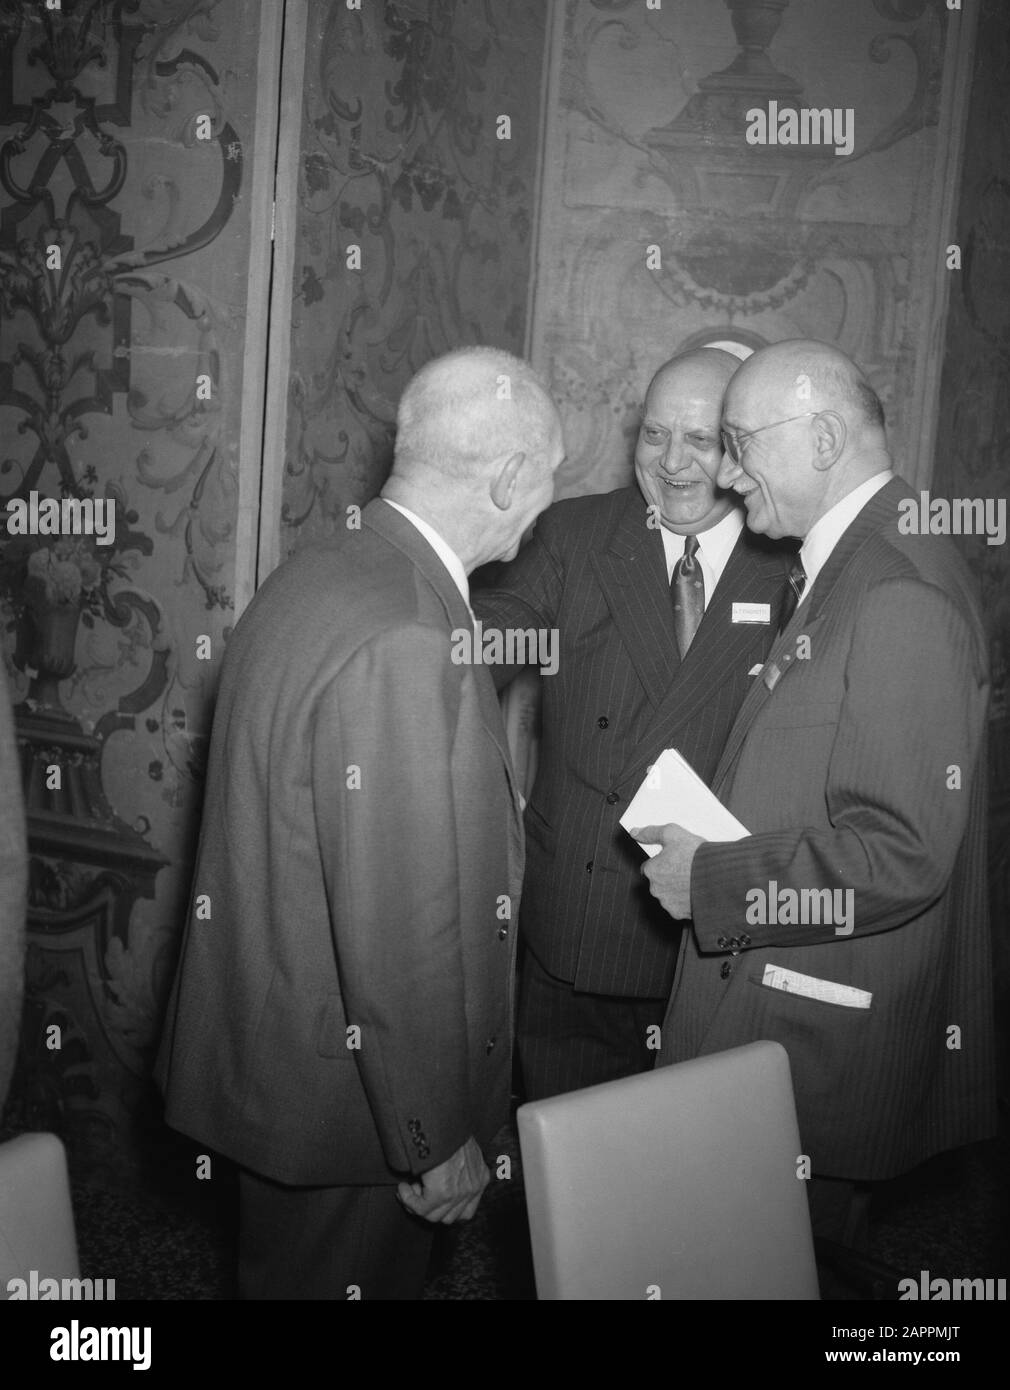 Press conference by Robert Schumann on the basis of Fondation europeenne de la culture in the Rijksmuseum Date: 22 November 1957 Keywords: press conferences Personal name: Schumann, Robert Stock Photo